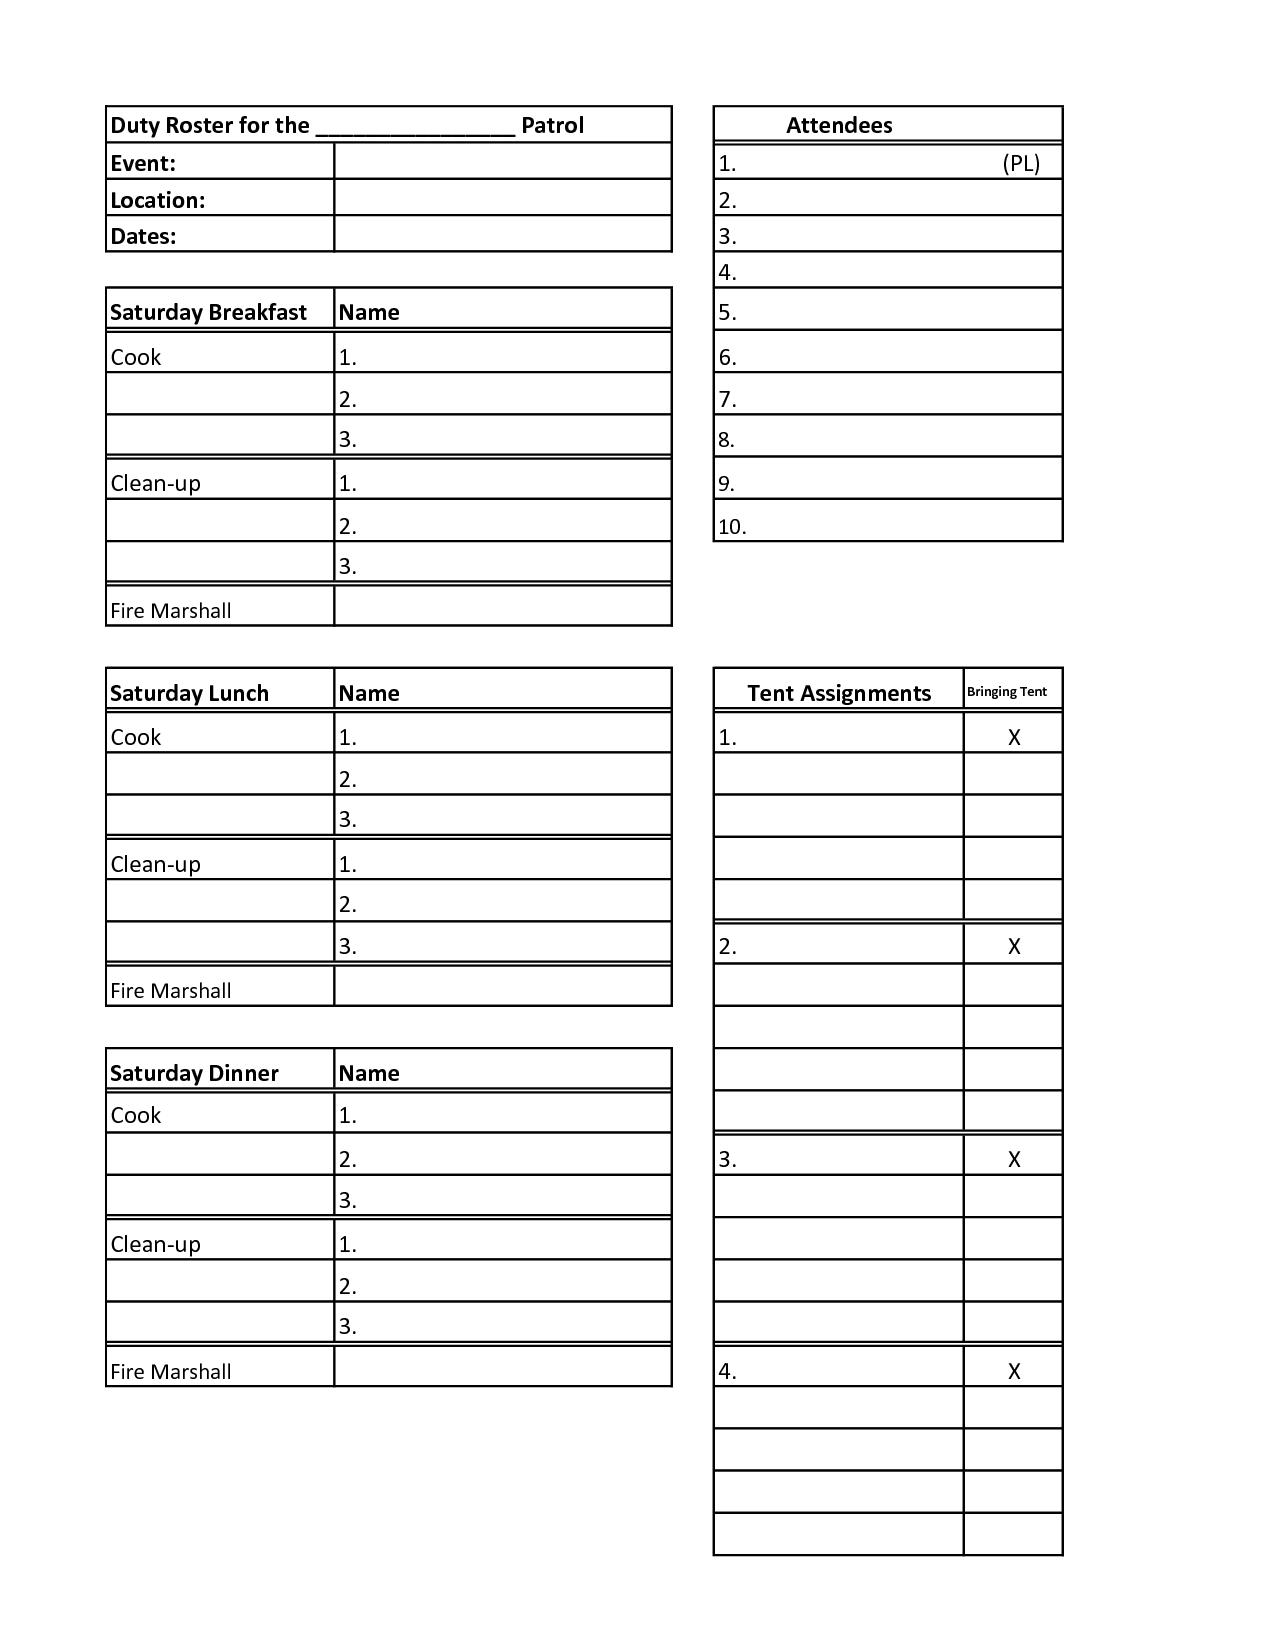 klauuuudia: Personnel Roster Template Regarding Blank Football Depth Chart Template